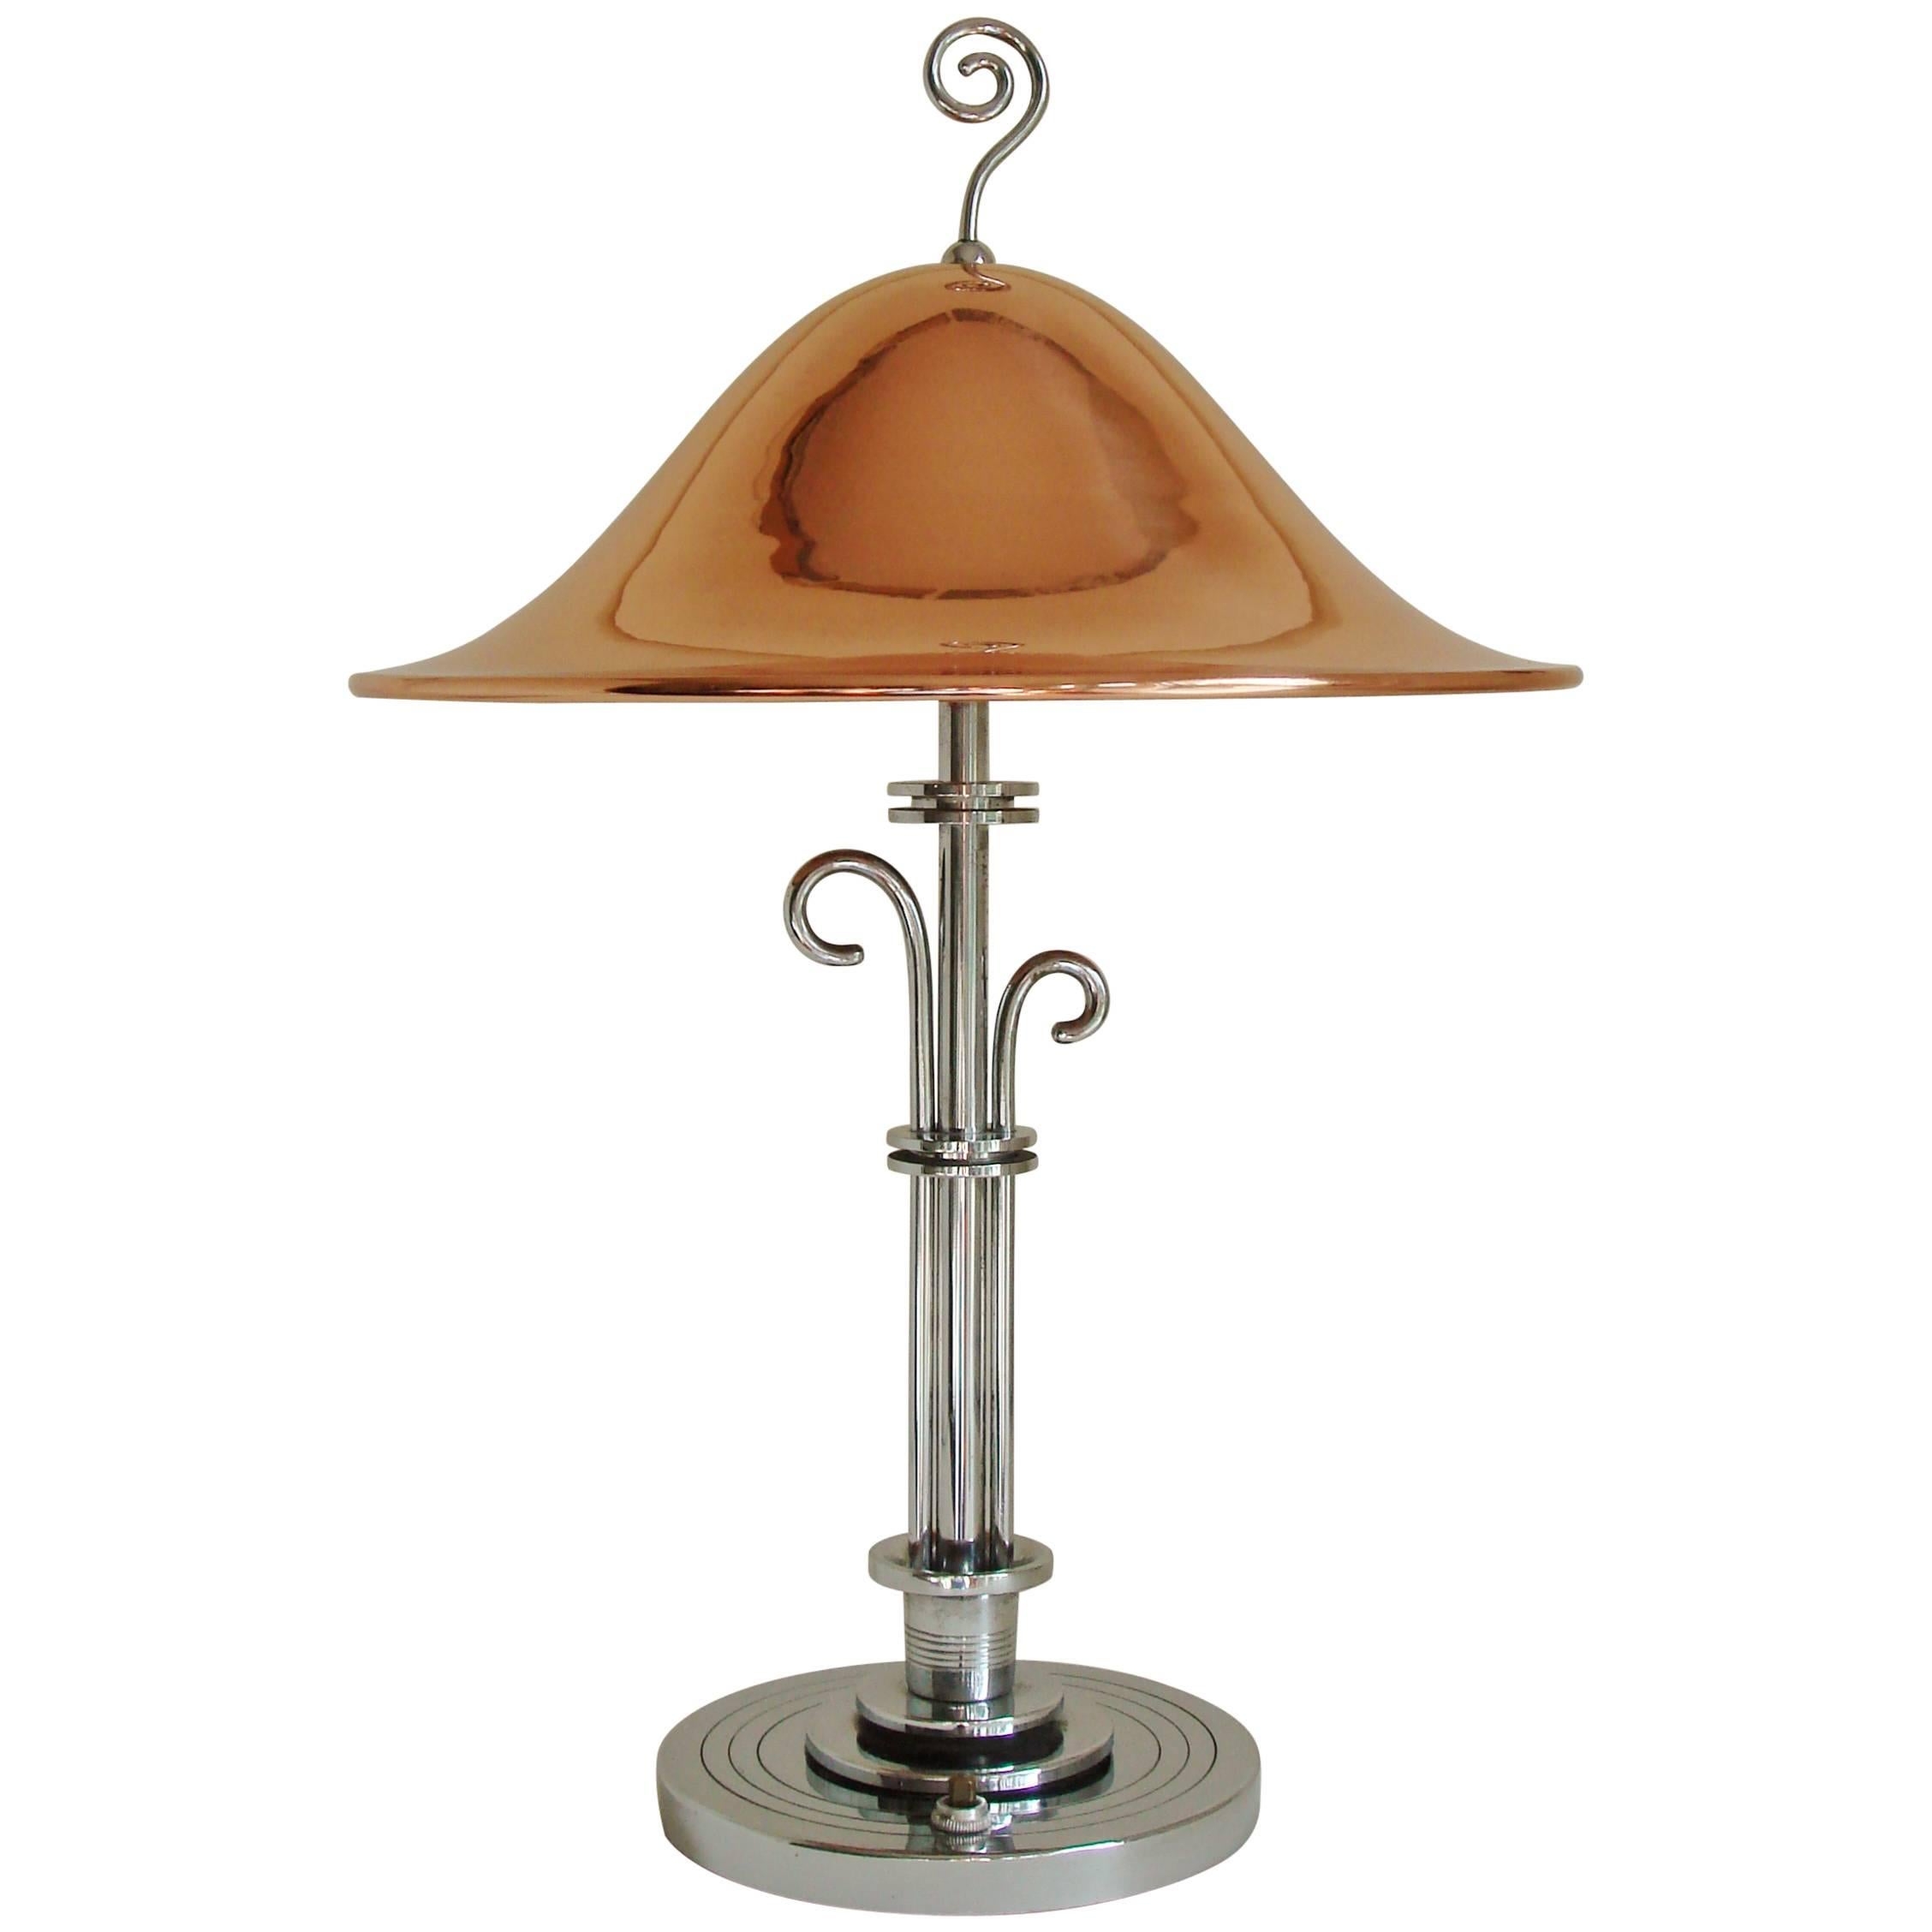 American Art Deco Chrome and Copper Organic Mushroom Lamp with Tendril Accents